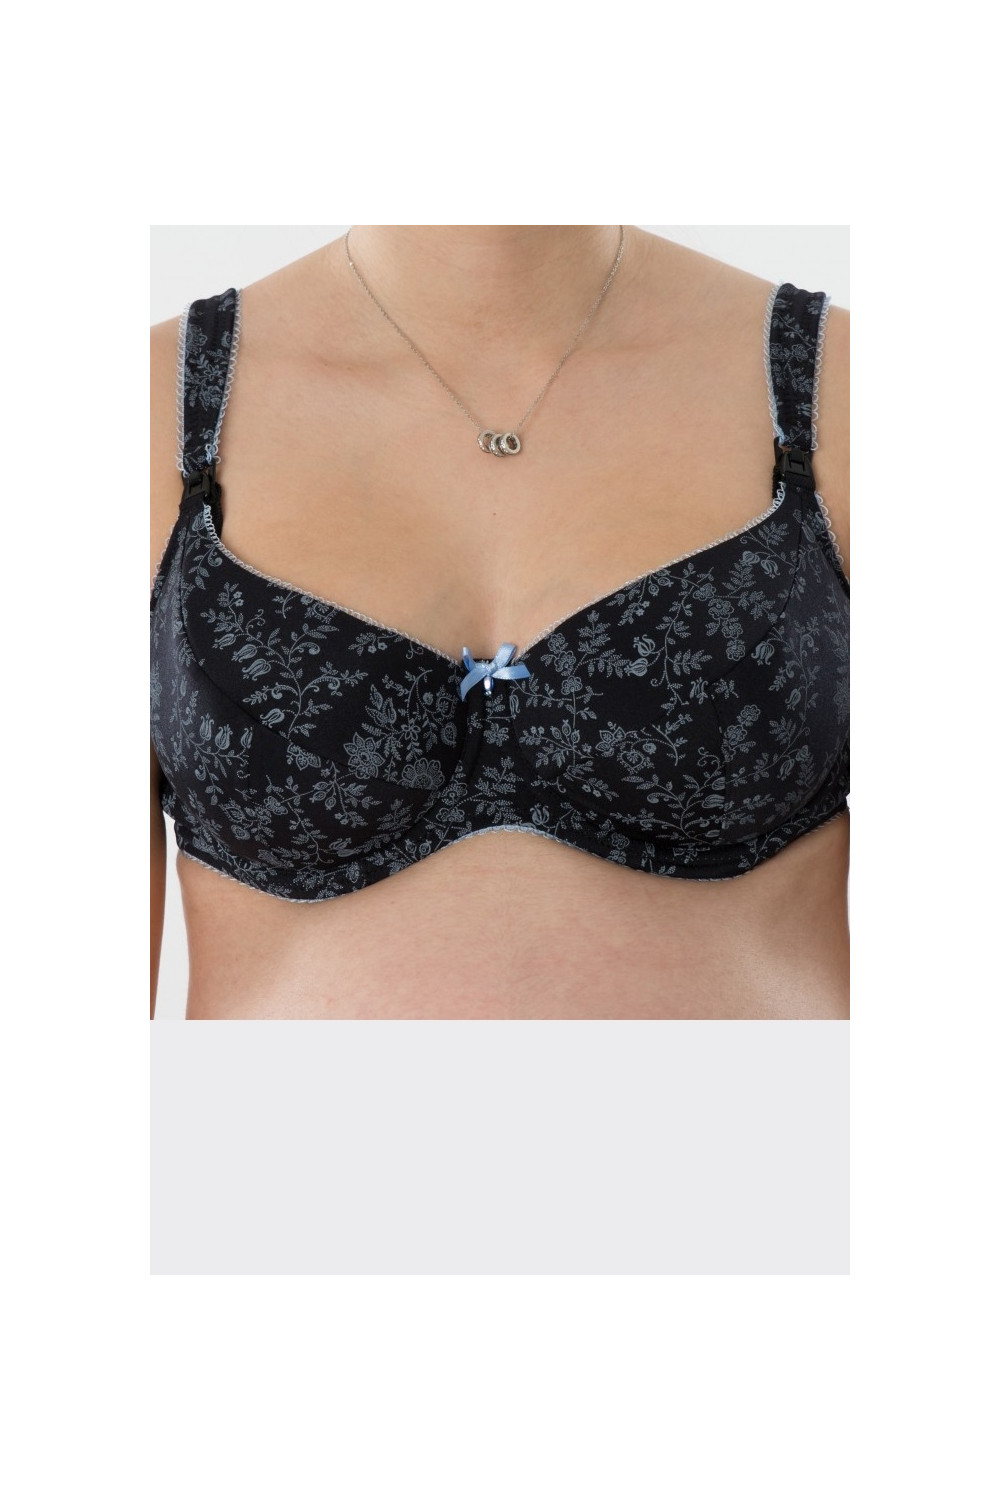 Comfortable nursing bra with soft underwire. With pre-formed seamless cups.